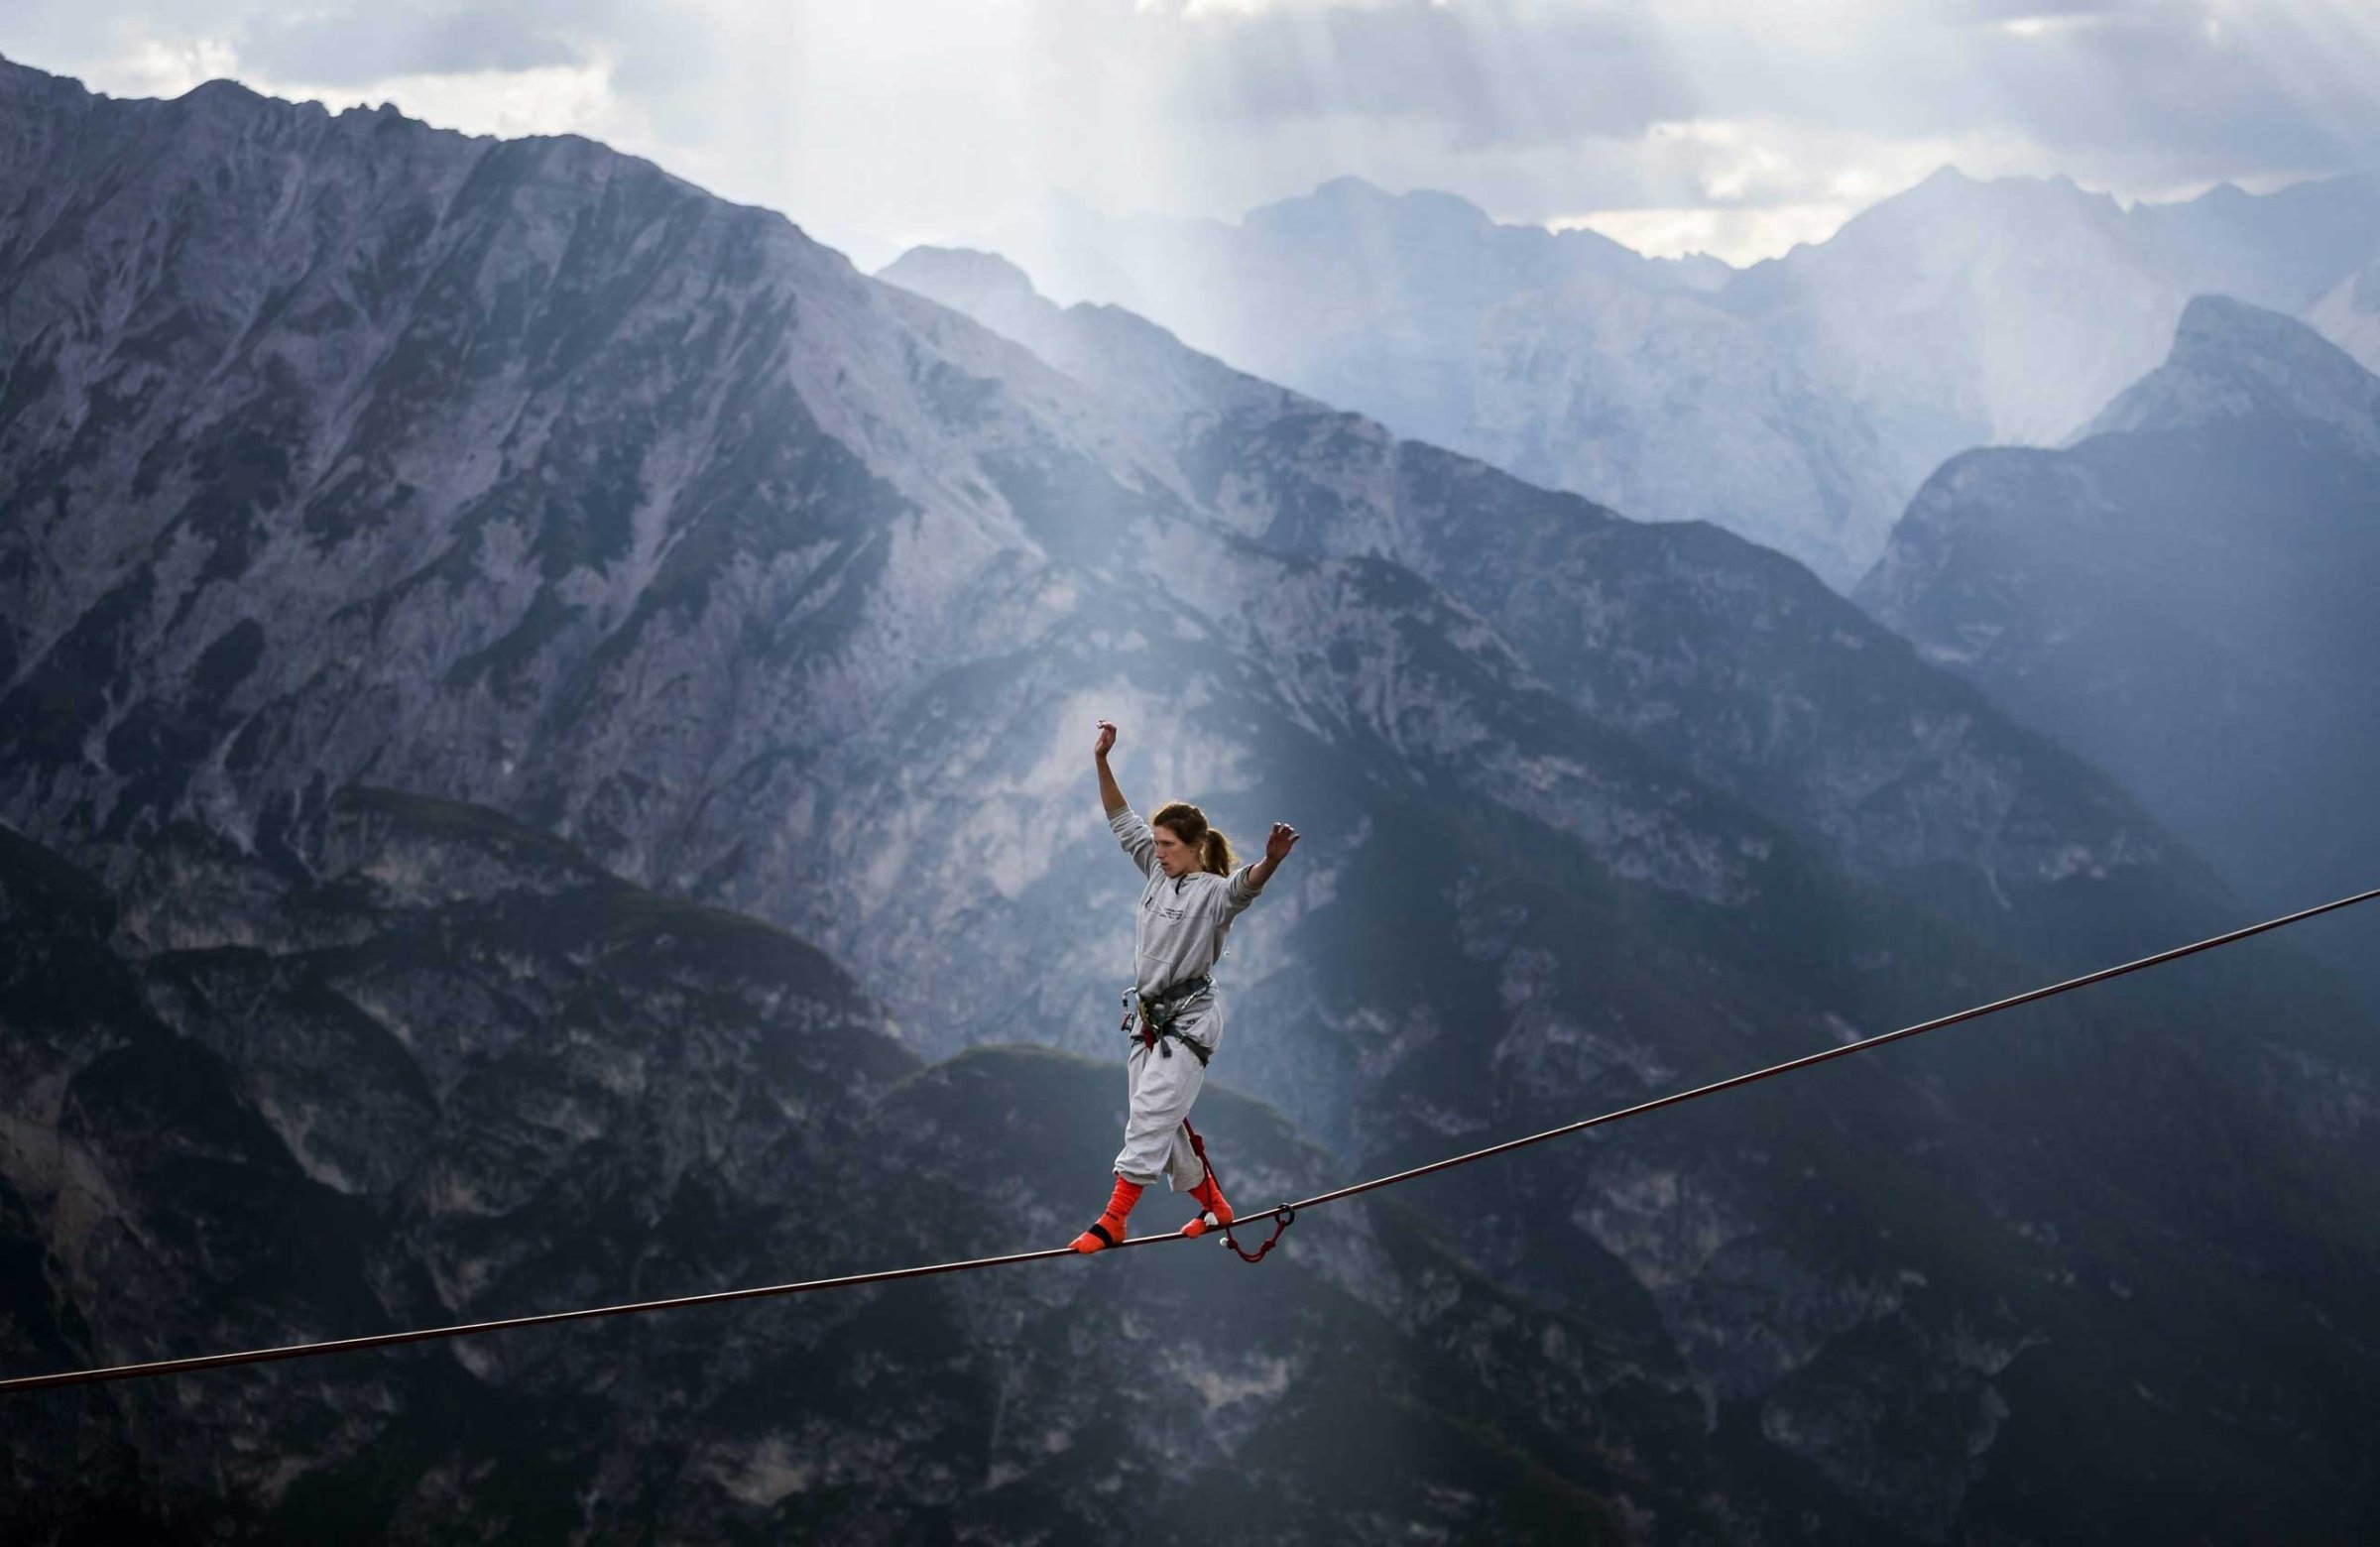 An extreme athlete balancing on a webbing during the International Highline Meeting in Monte Piana, near Misurina, in the northern Italian Alps, Italy on Sept. 11, 2014.